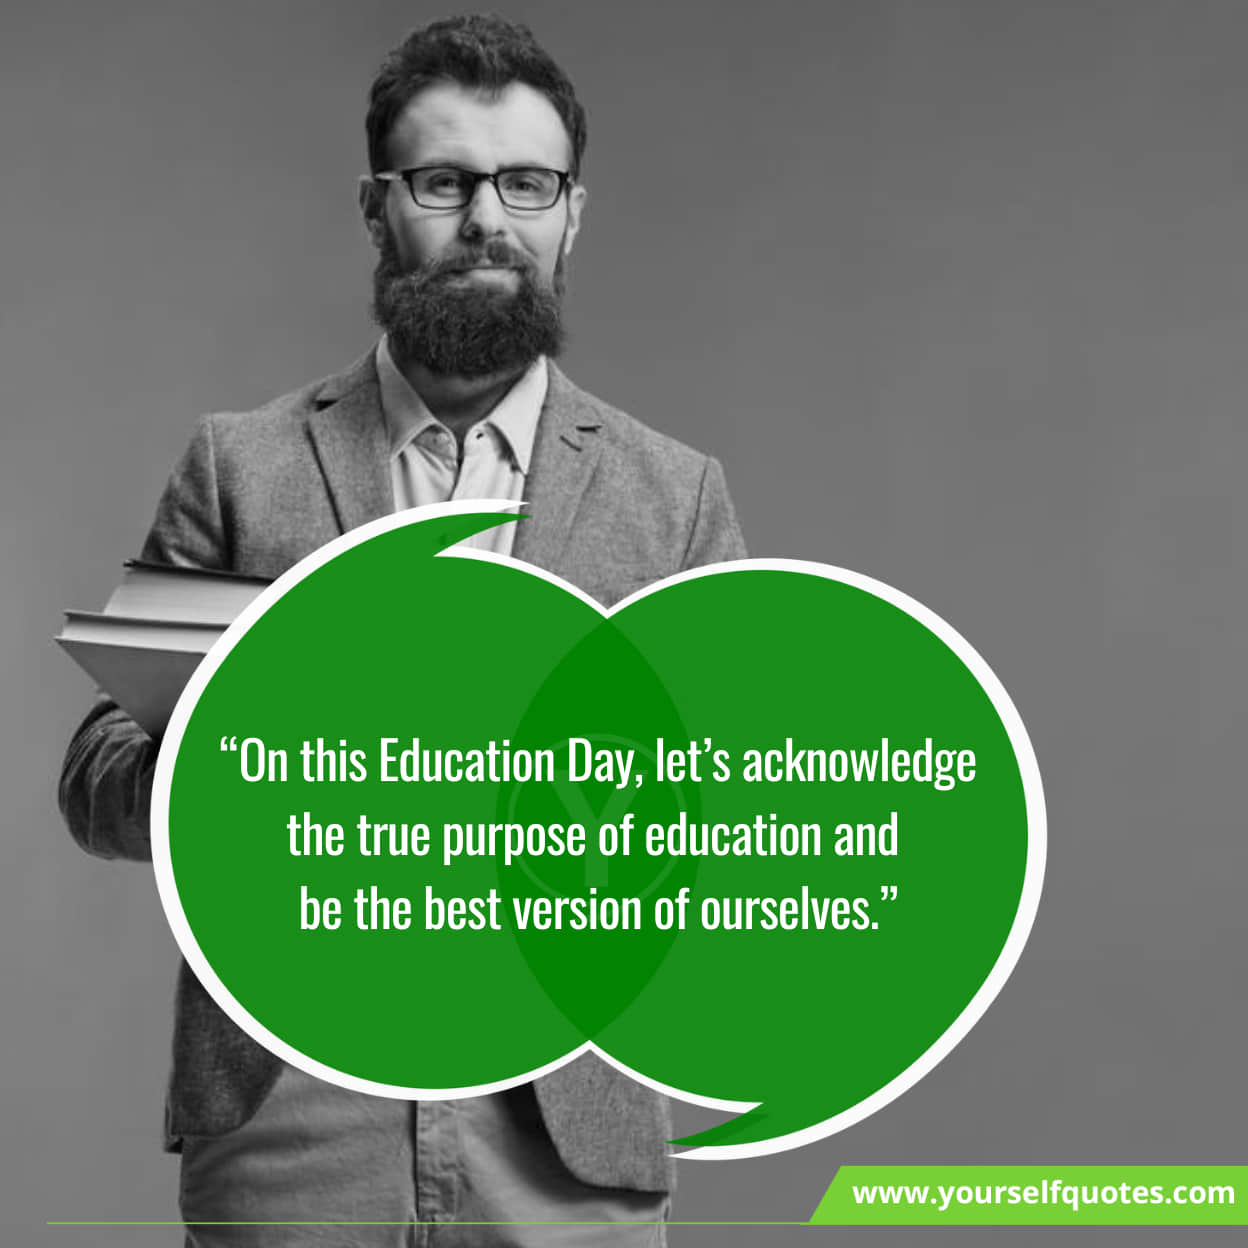 101 Best Education Day Wishes, Messages, And Quotes